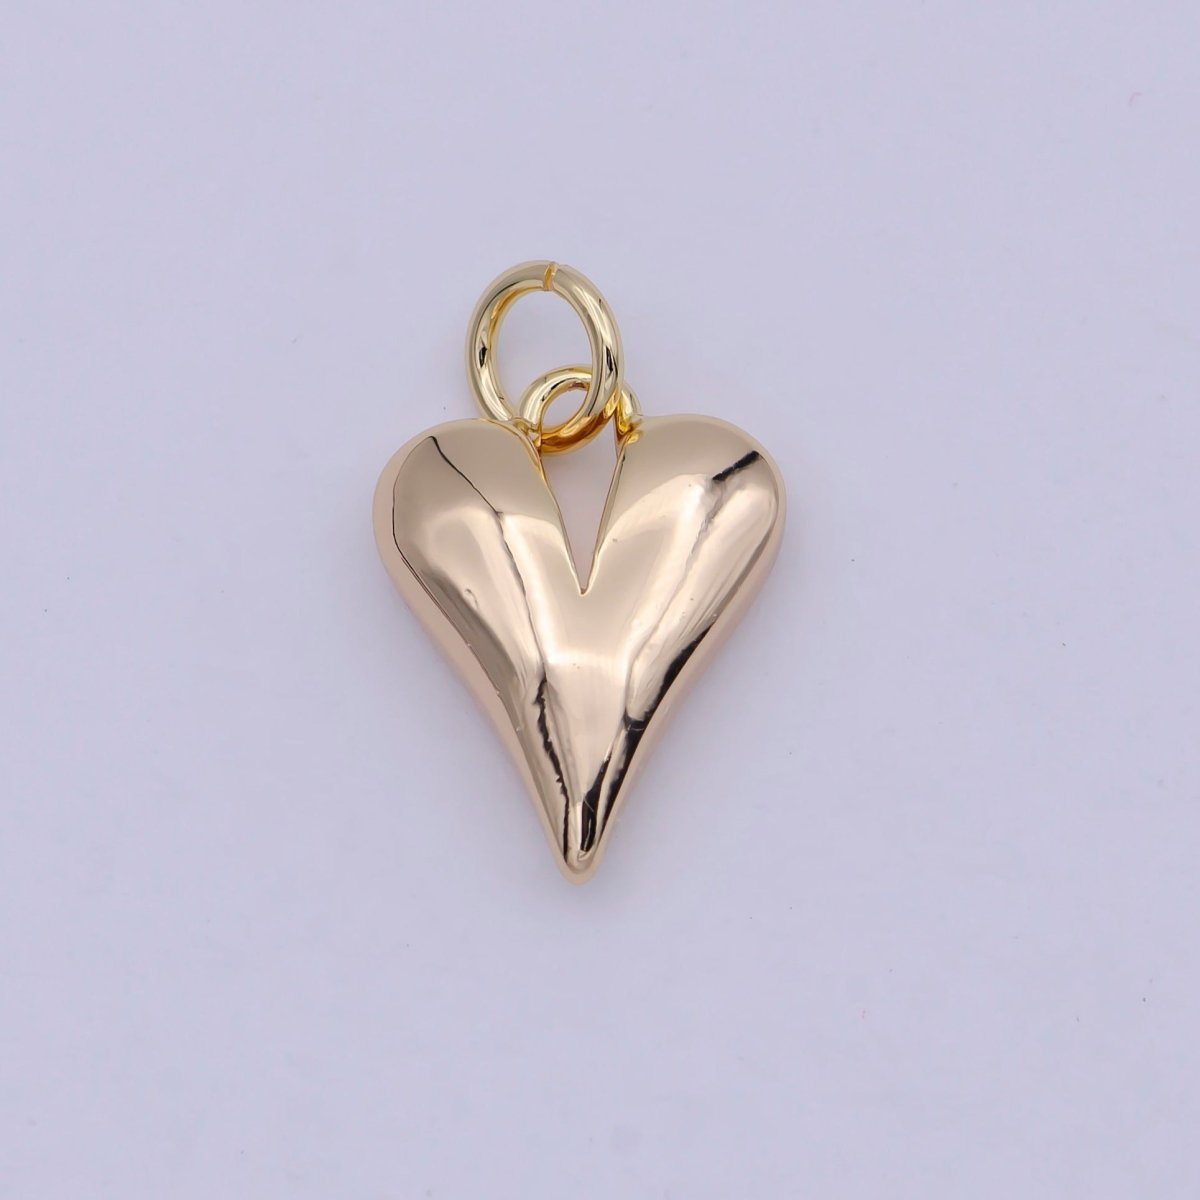 18k Gold Filled Dainty Puff Heart Charm for Love Valentine Jewelry Making N-907 - DLUXCA